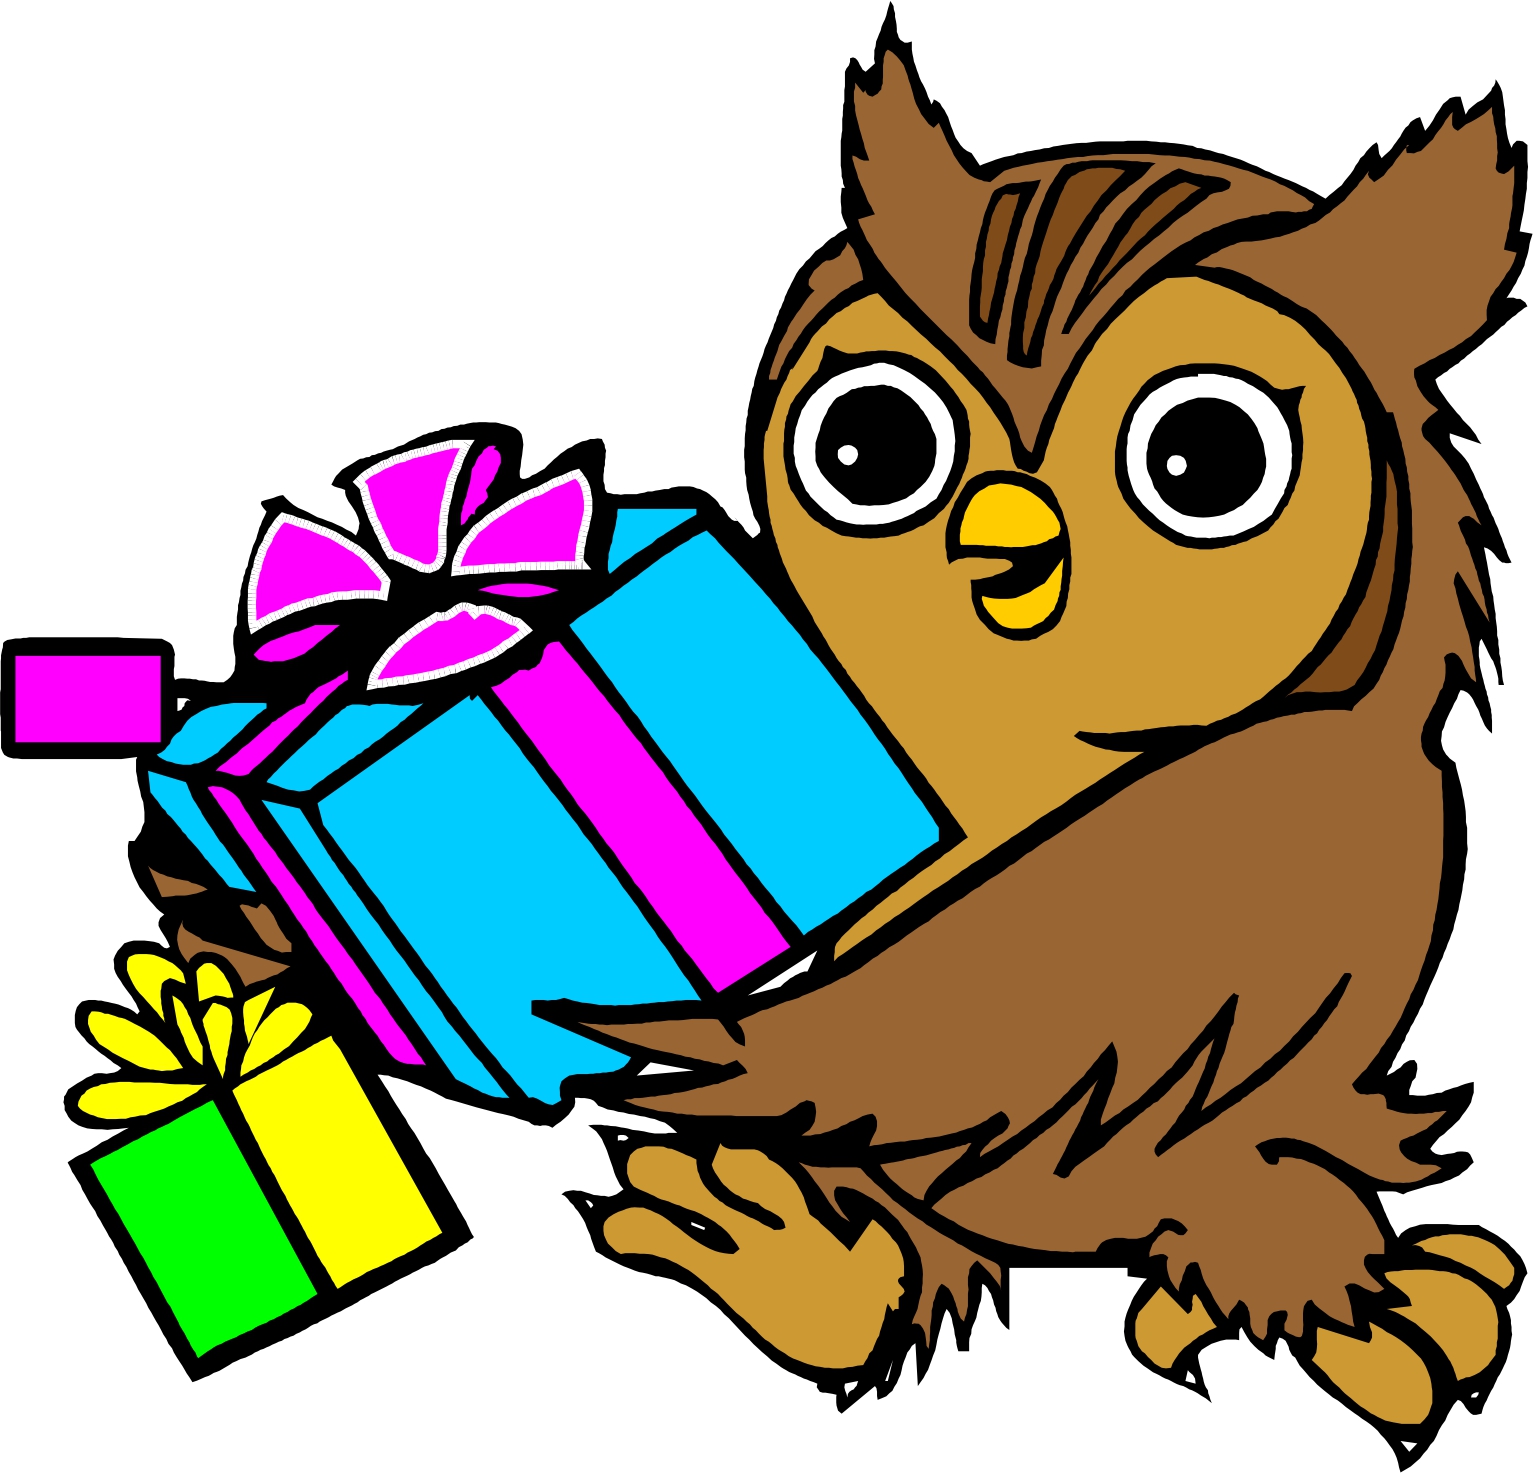 Images For > Baby Owl Images Cartoon